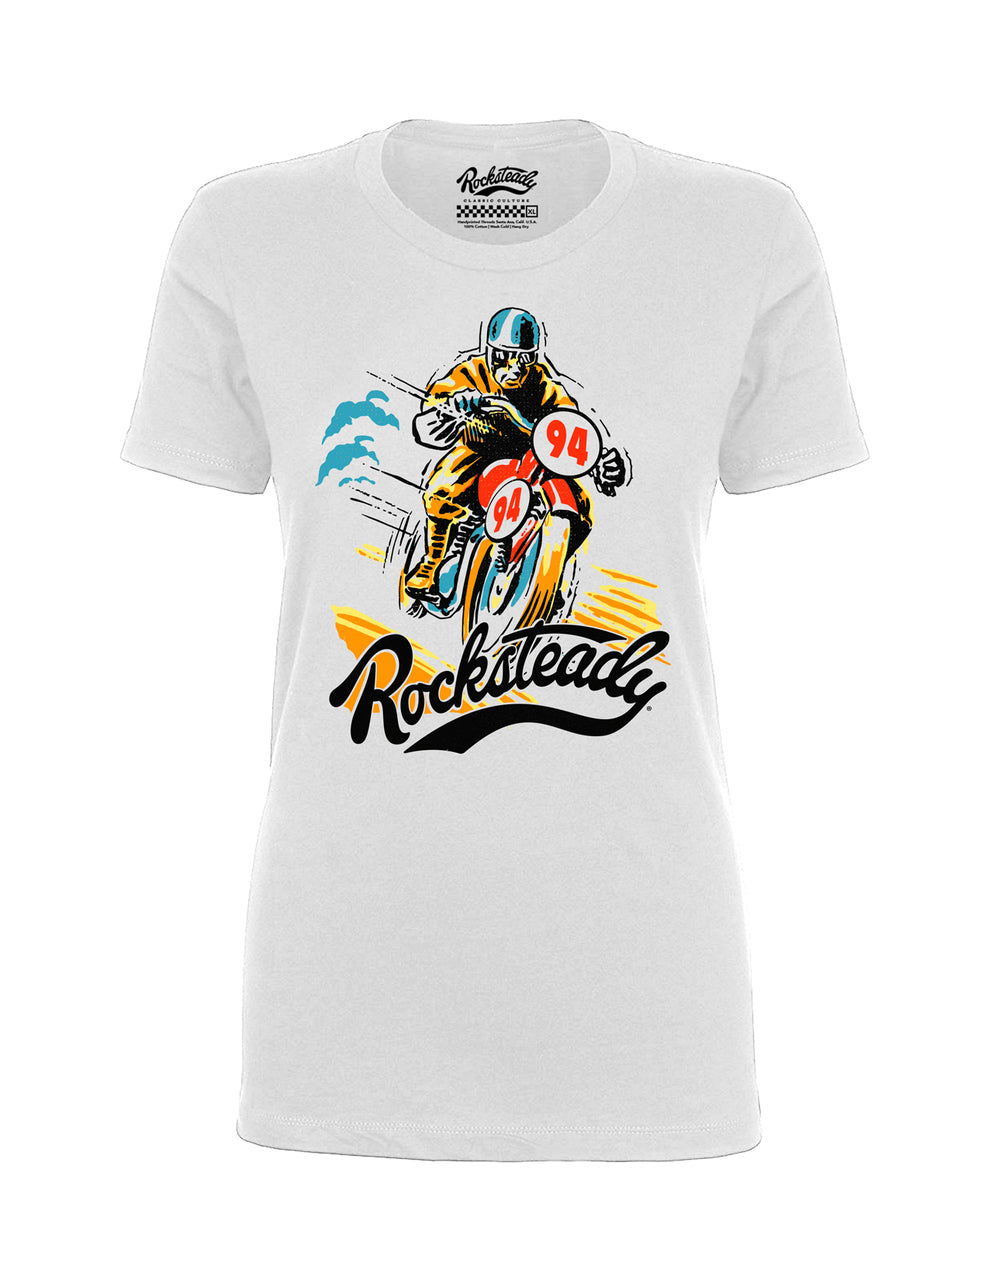 Steady Rocksteady Solo Racer Ladies T-Shirt Steady Canada white womens tee with cafe racer motorcycle graphic in blue yellow and orange retro vintage pinup rockabilly biker altfashion top for women Canadian Pin-Up Shop Suzie's Bombshell Boutique Port Dover